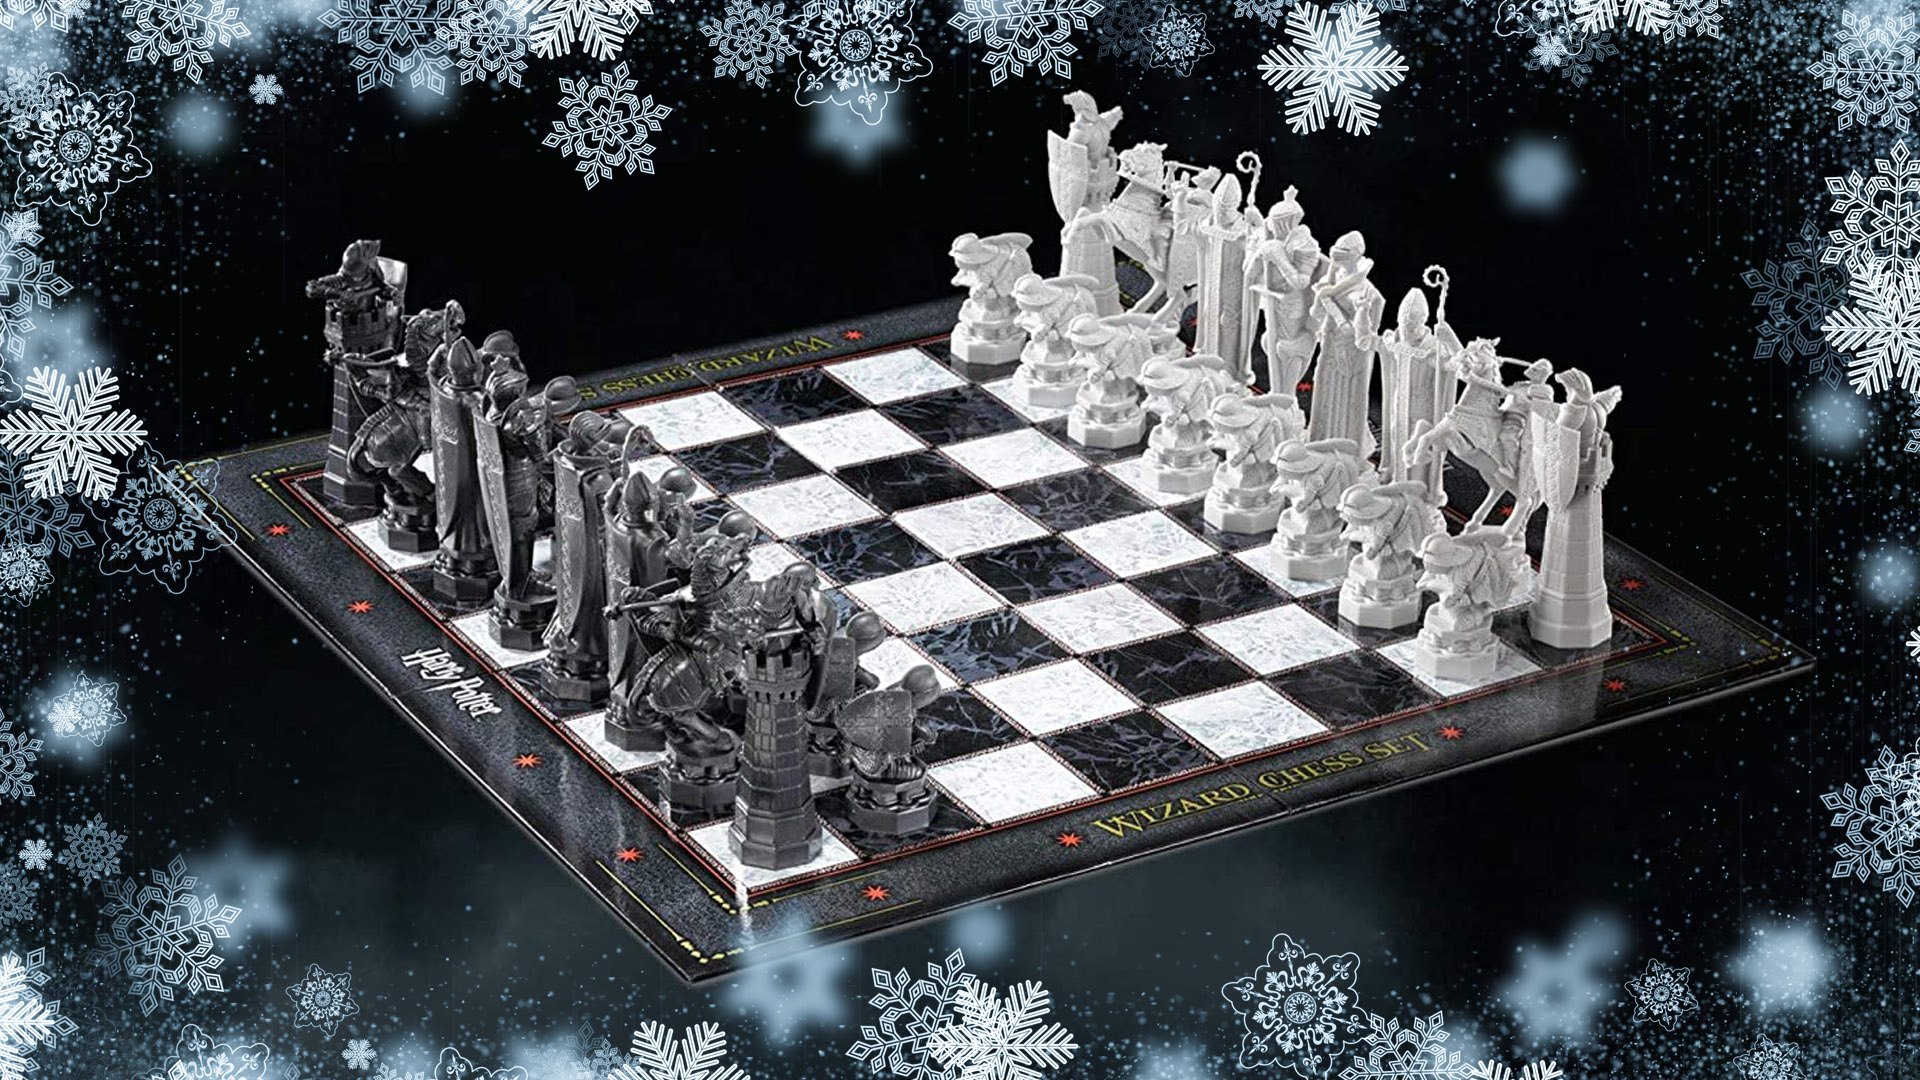 3D Scanning - Harry Potter on Behance  Harry potter chess, Harry potter  chess board, Noble collection harry potter